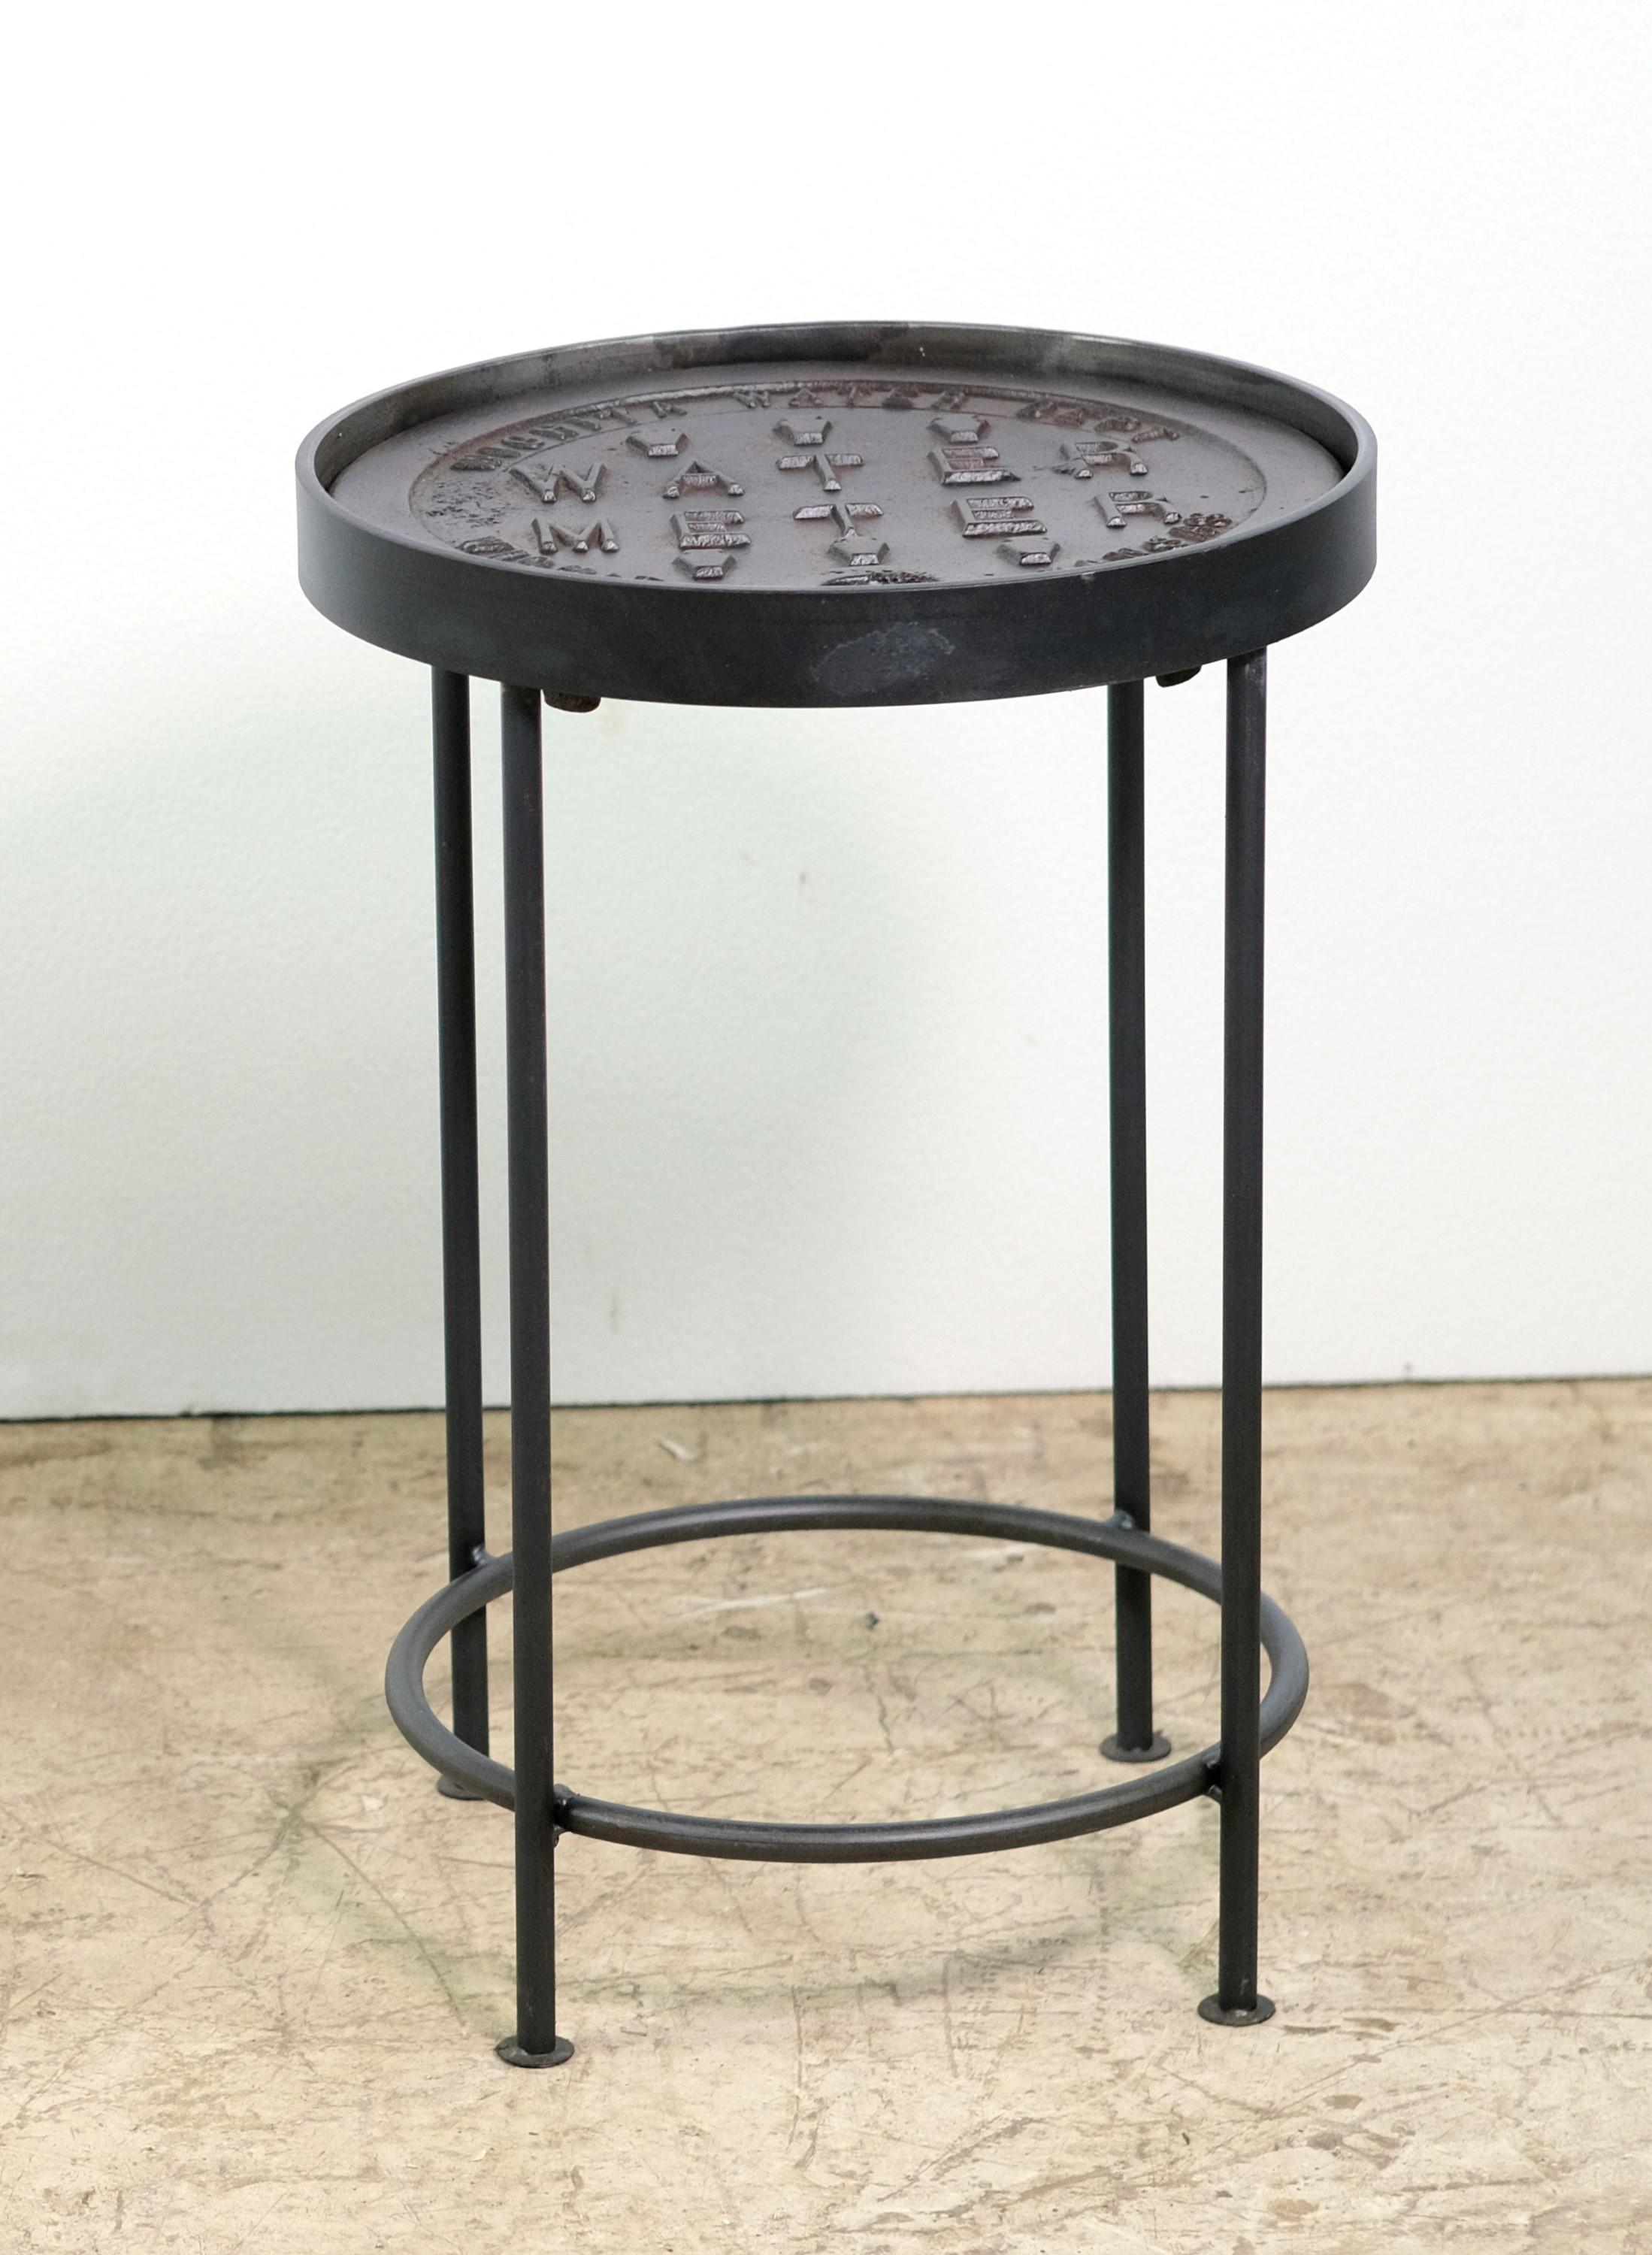 Round top cover is an original cast iron Wichita, KS water meter cover from the Wichita Water Dept. in Kansas. Now reclaimed and made into an Industrial style side table or stool. Top has a slight recess to hold a small round table top. Matching